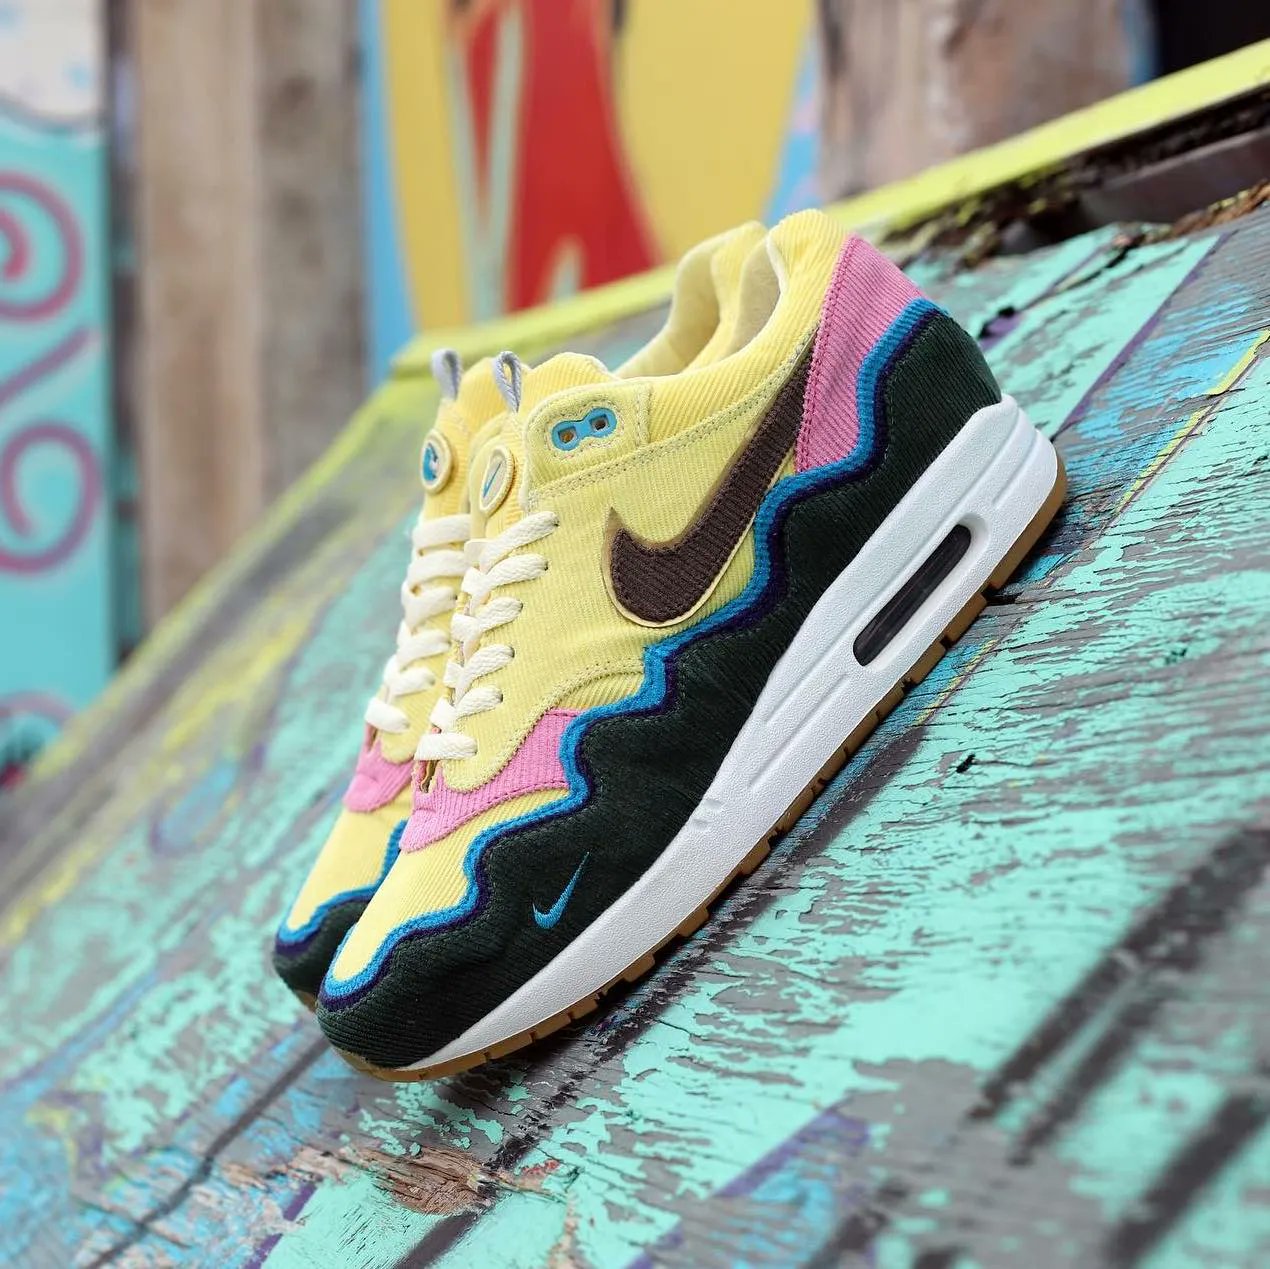 Sneaker News on Twitter: "Here's what a Sean Wotherspoon x Patta x Nike Max 1 'The Wave' collaboration might look like https://t.co/w1b07hGVFO" / Twitter